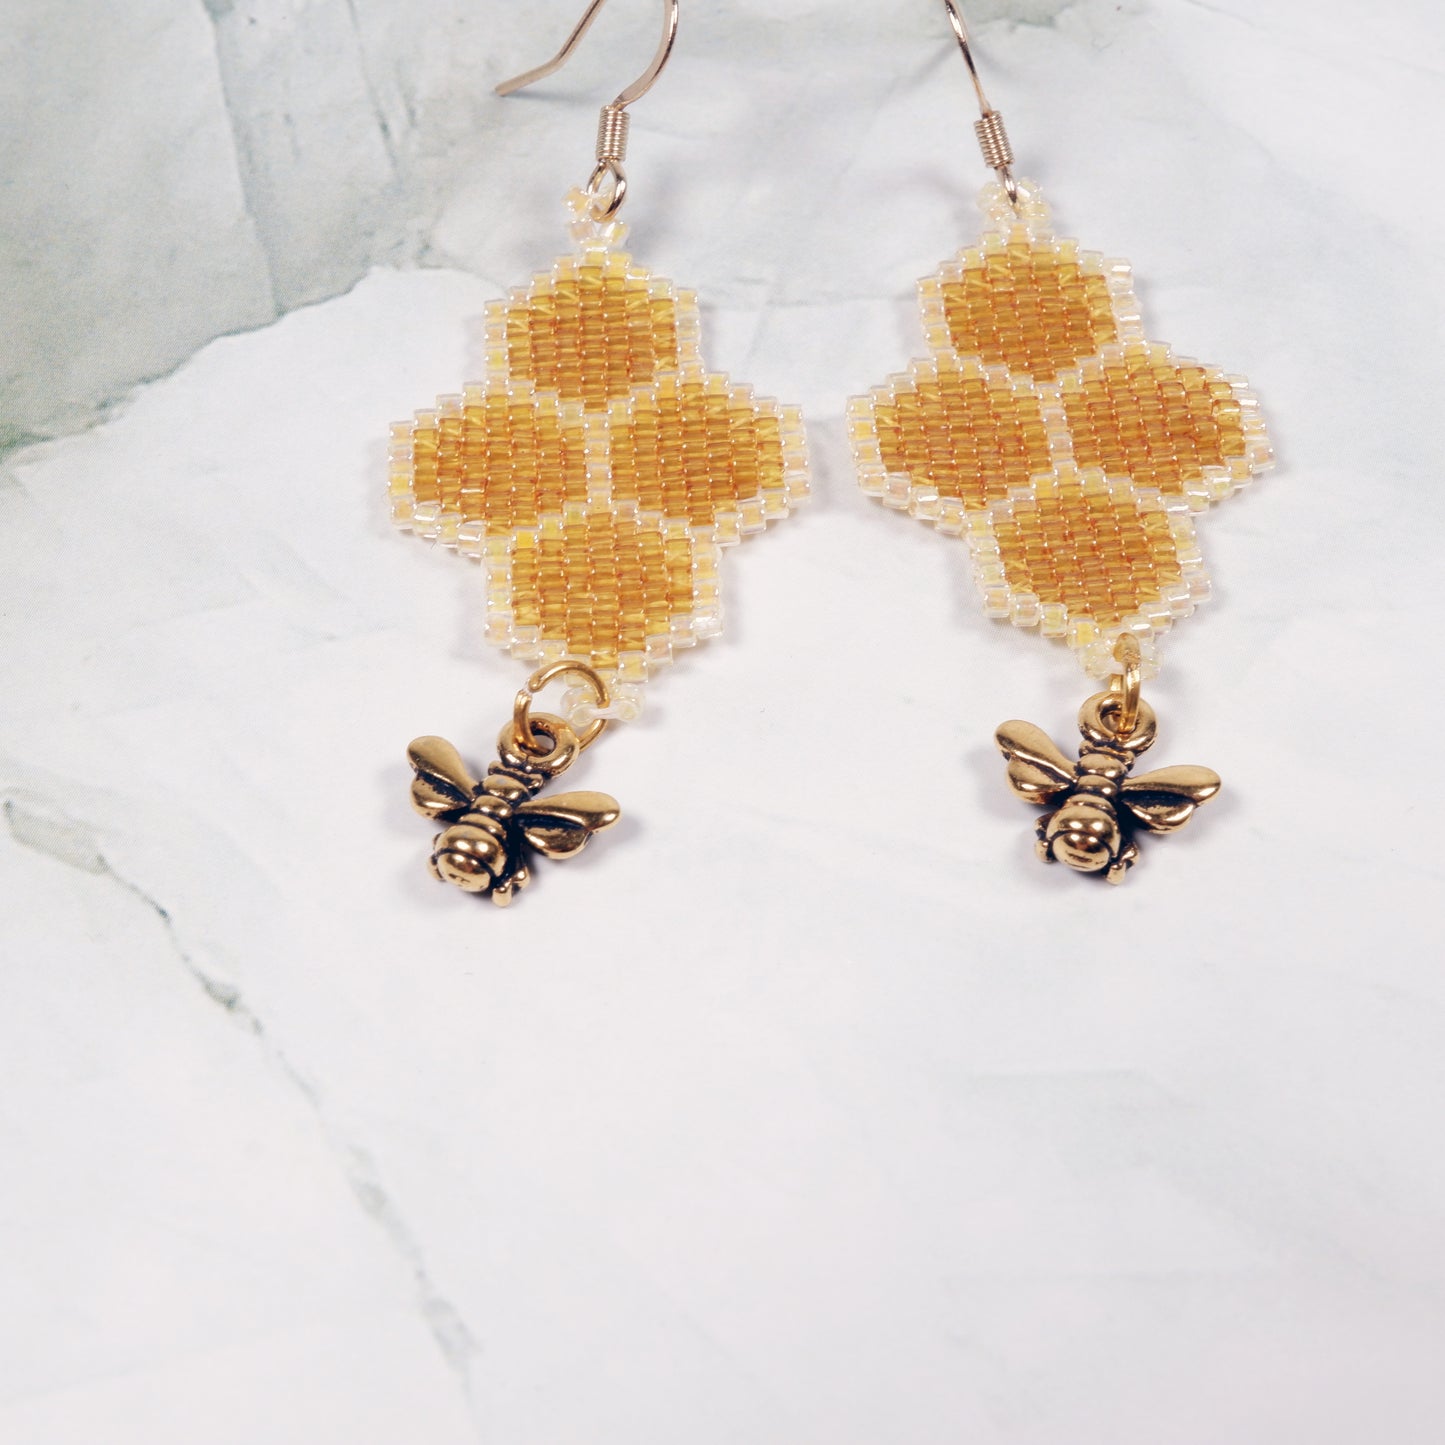 Large Honeycomb Earrings with Bee